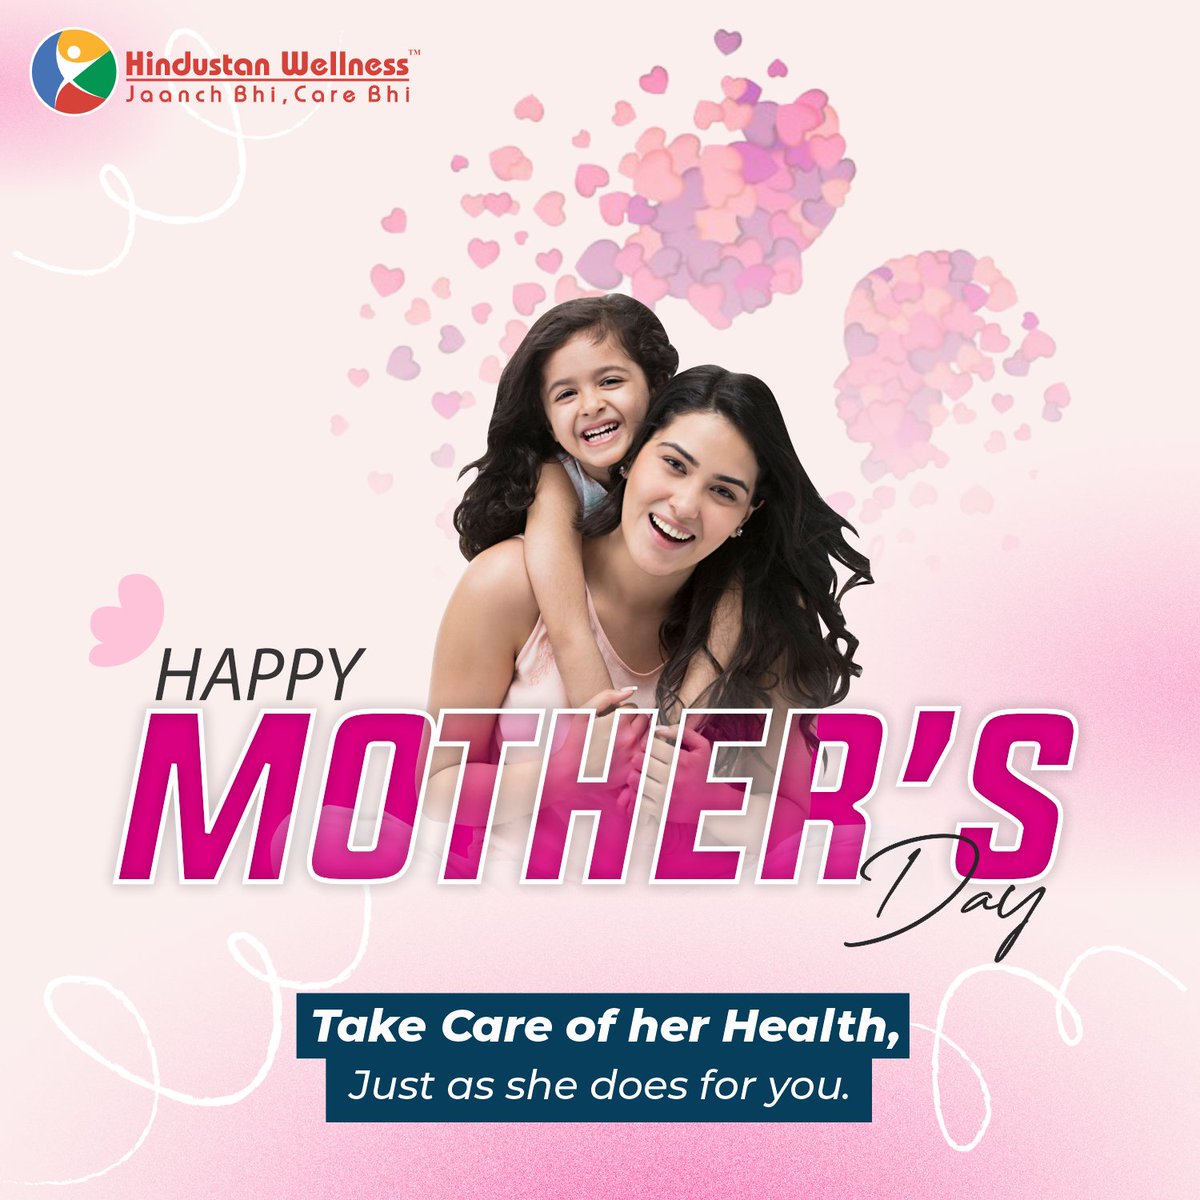 Happy Mother's Day!

#mothersdaygift #healthcheckup #motherhood #mothersdayspecial #love #healthyyou #blessed #happiness #healthcare #HindustanWellness